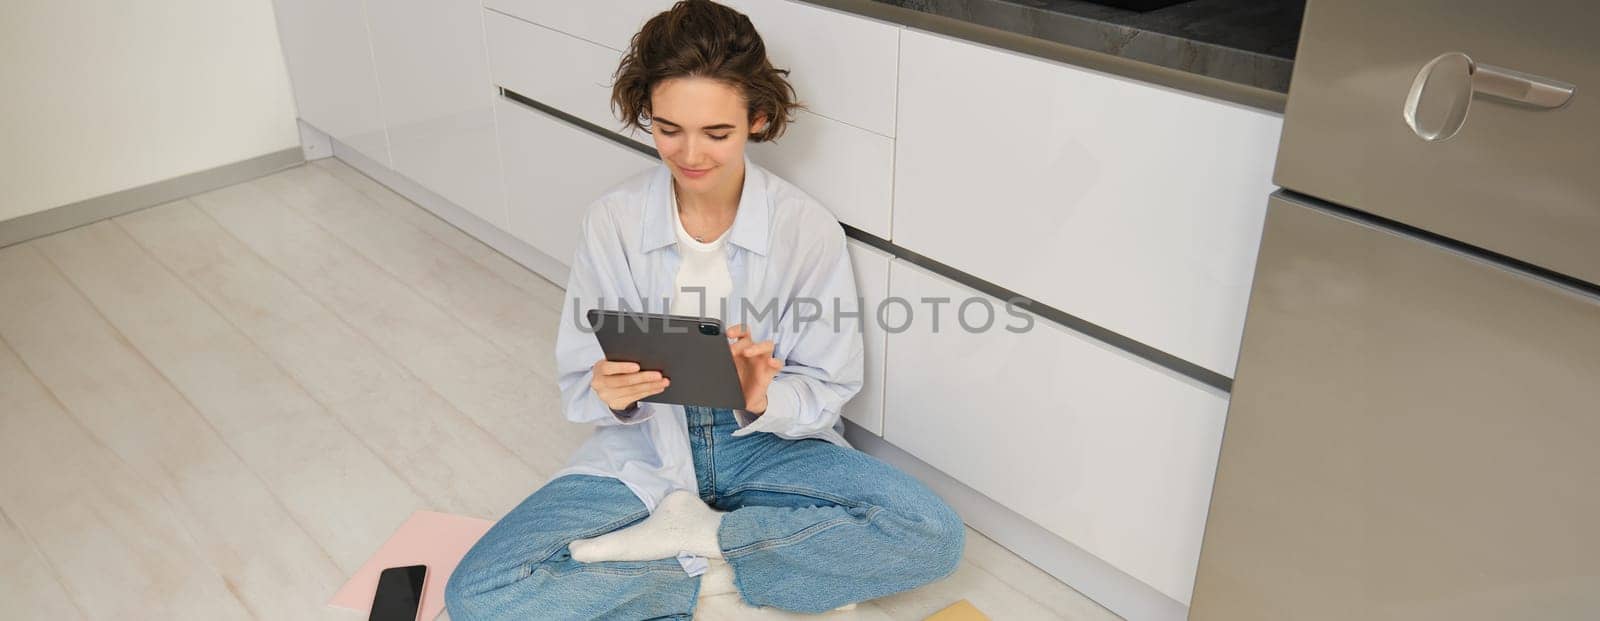 Young woman, freelancer works from home, looks at her digital tablet, reads through documents online, smiling and sitting on floor in kitchen.